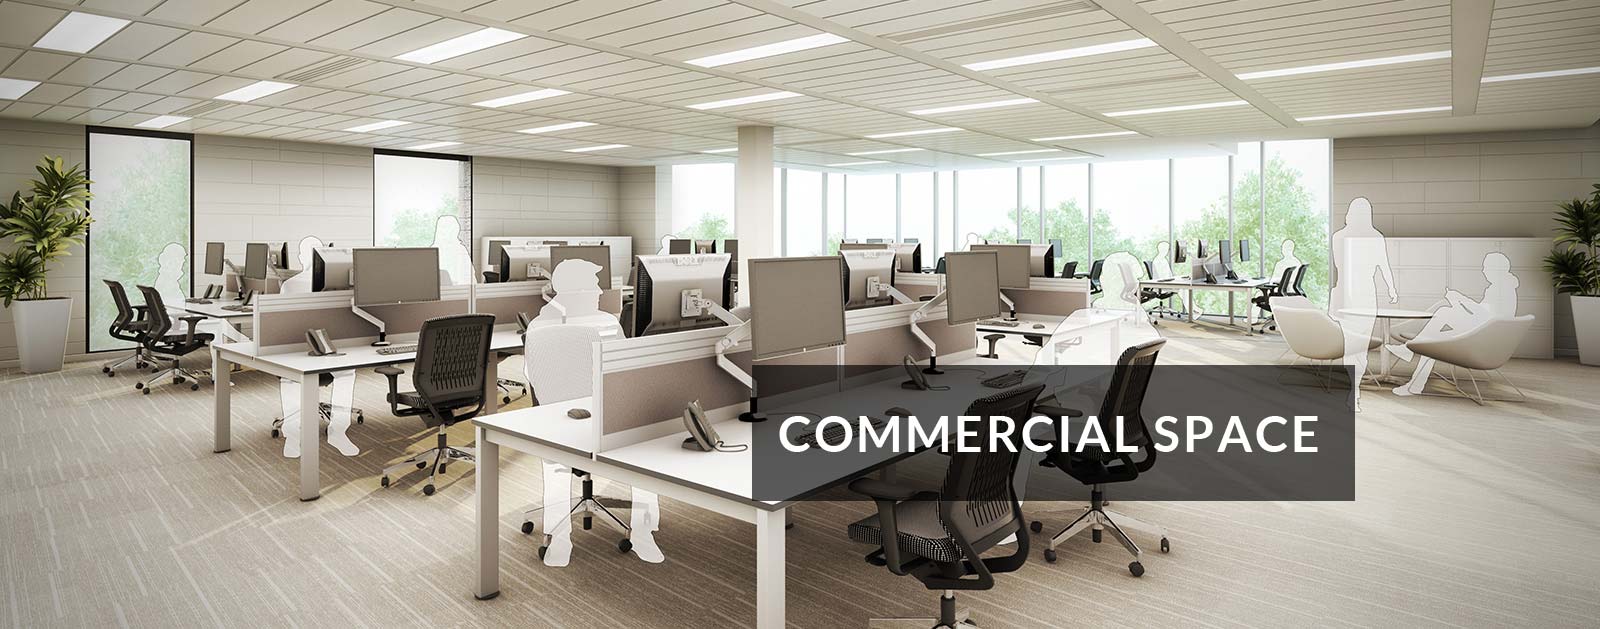 Scalade - Commercial Spaces